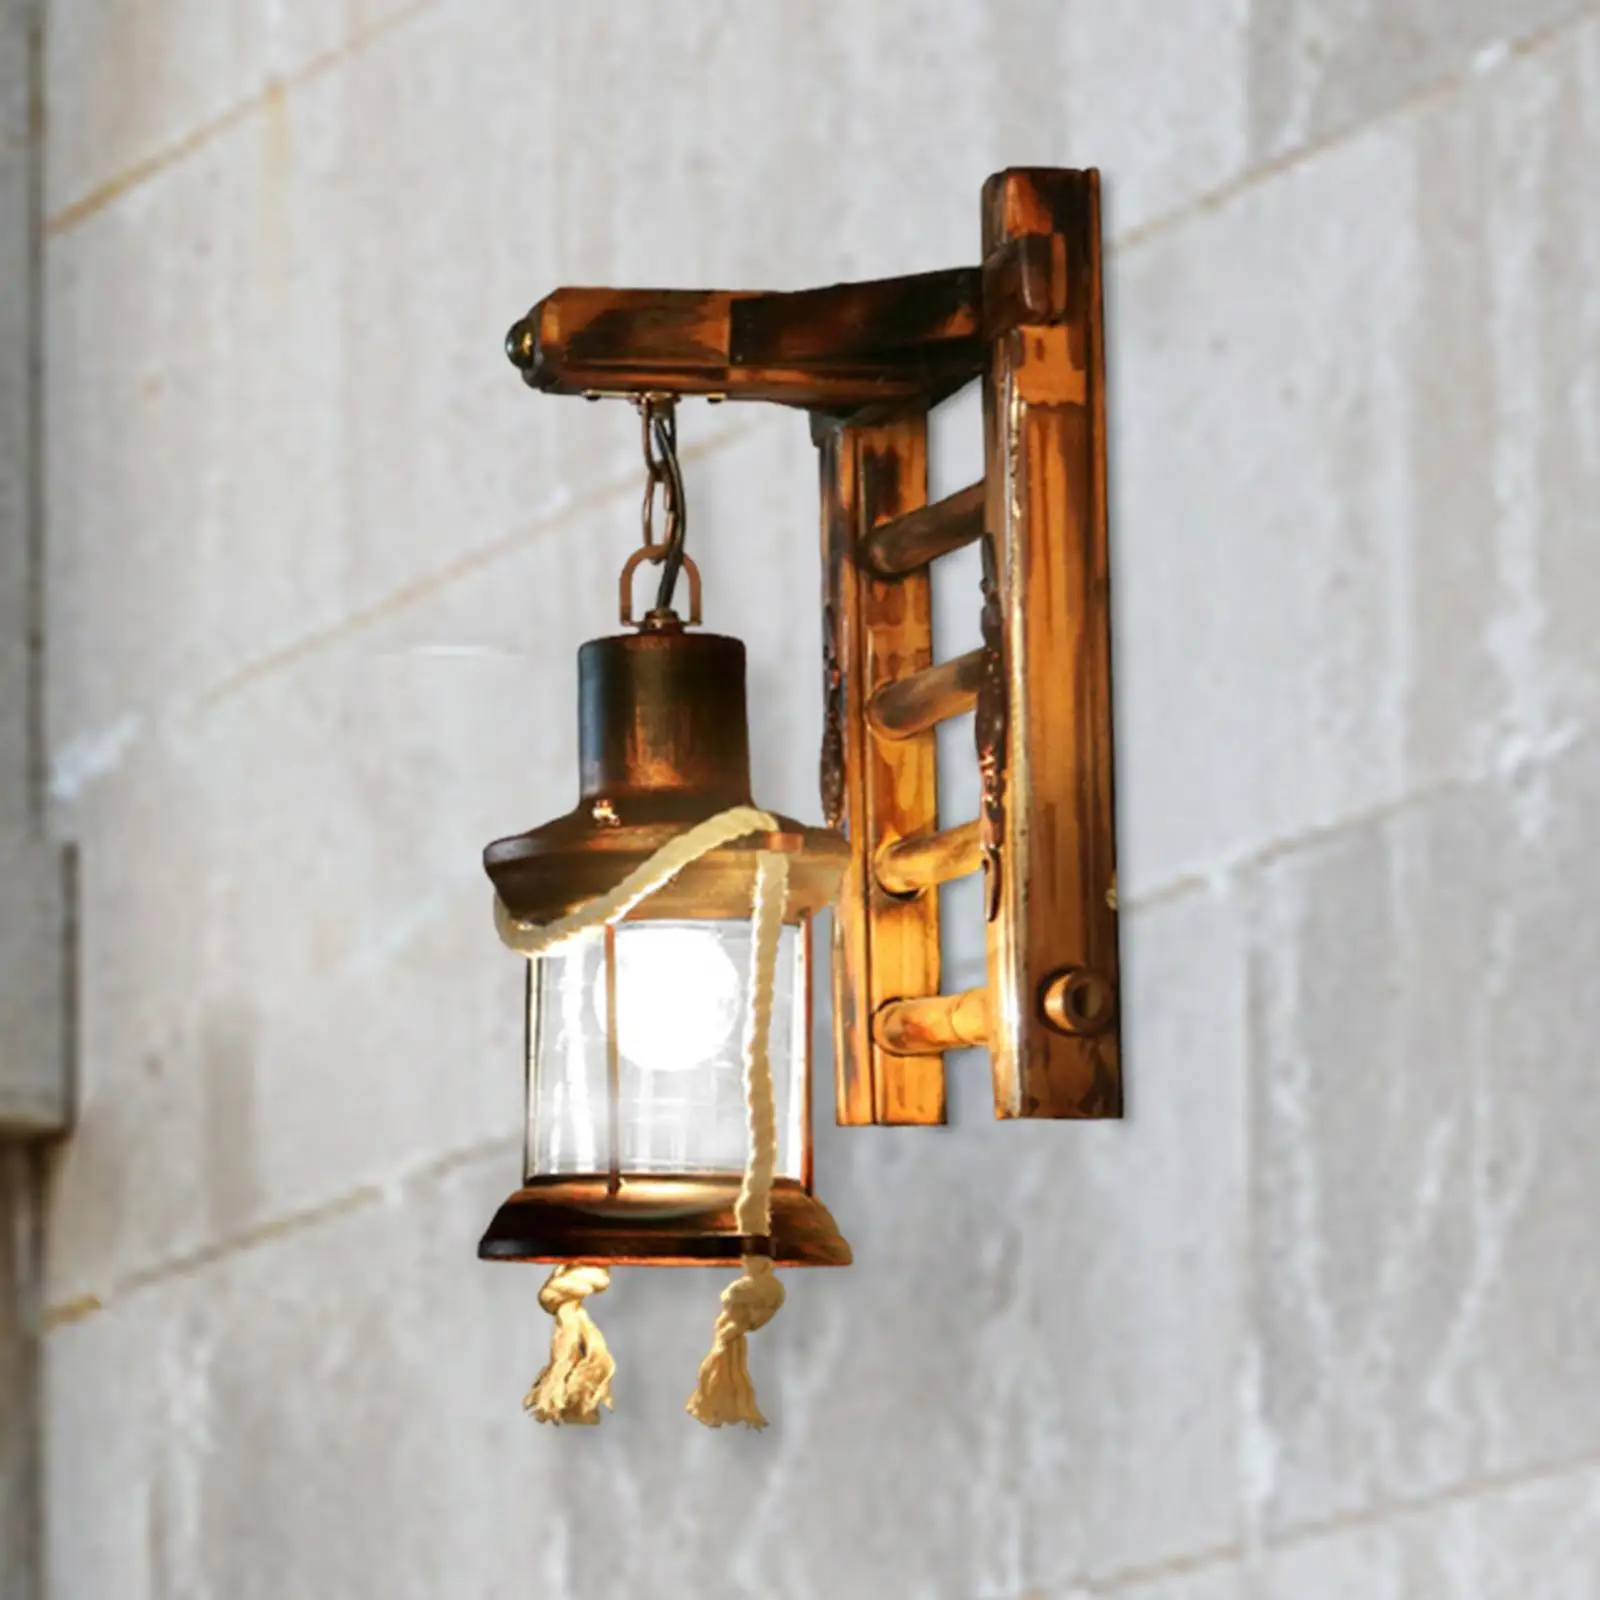 Rustic Wall Sconce Lamp Lighting E27 Vintage Style Lantern Decorative Wall Light for Home Living Room Bathroom Decoration